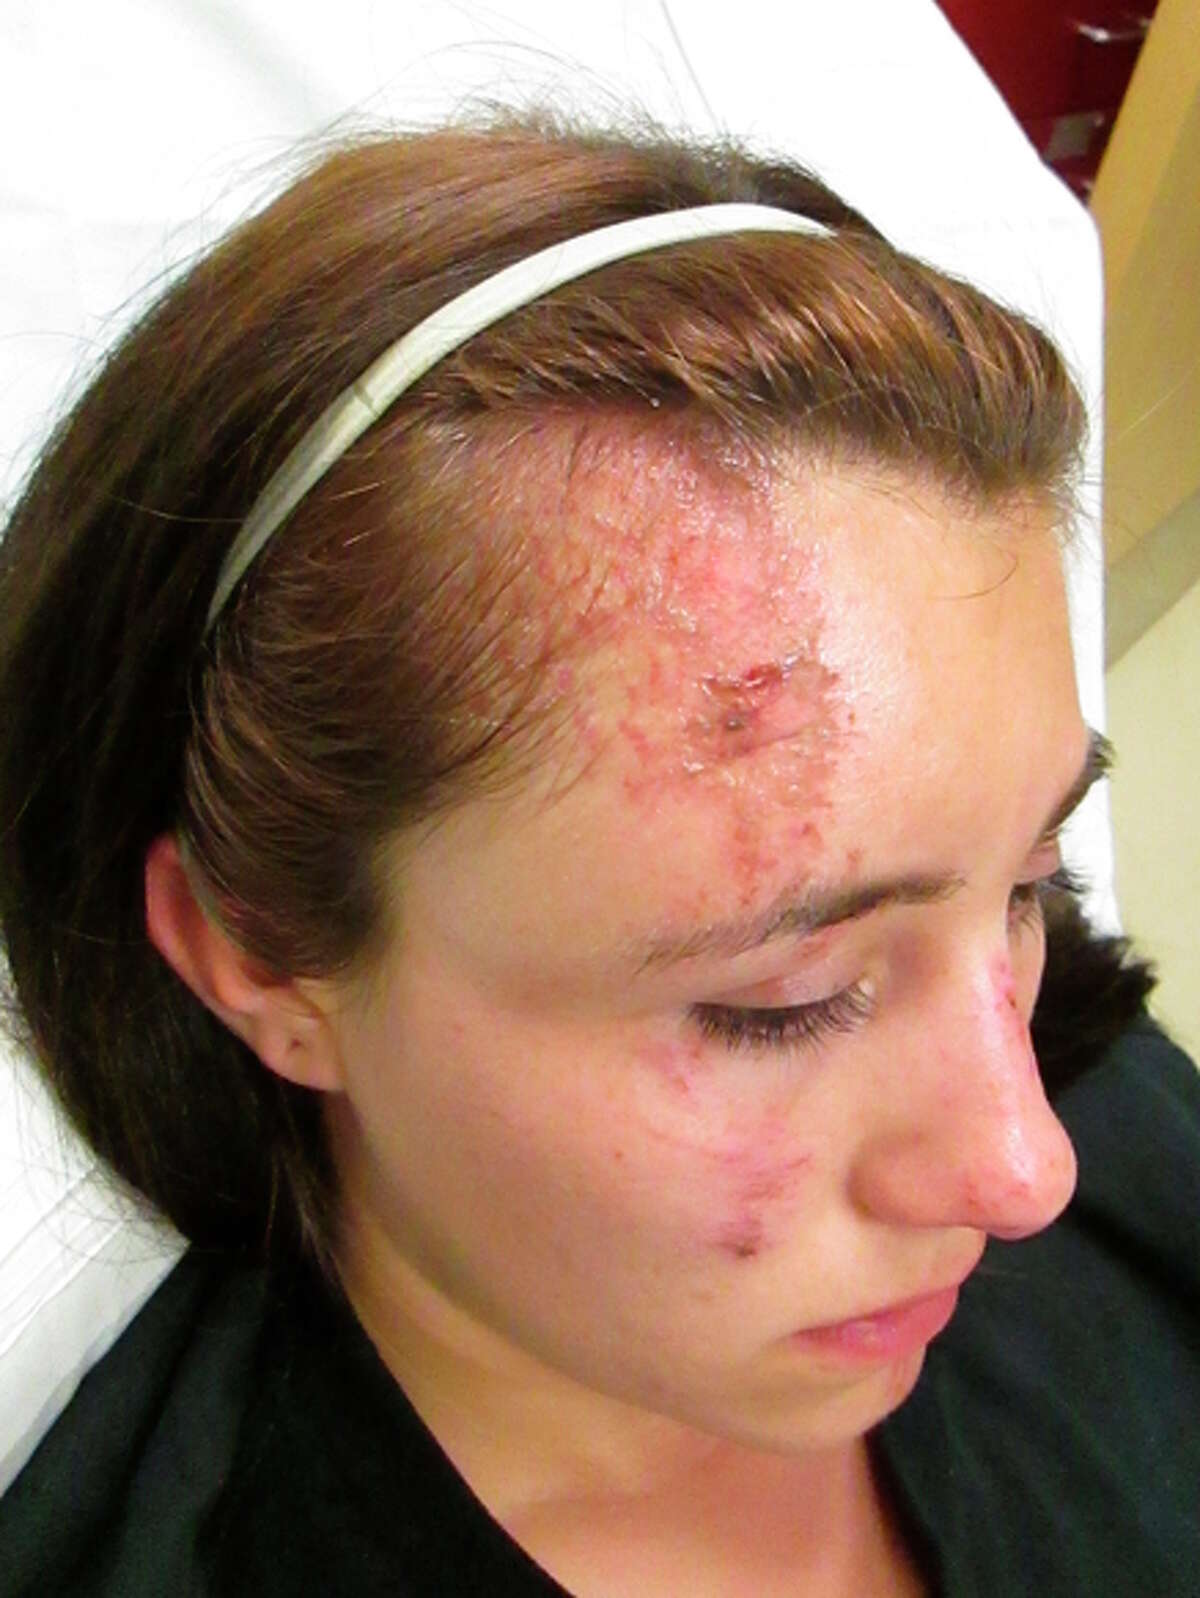 Gabrielle Lemos sued after suffering injuries she claims were inflicted by a deputy.